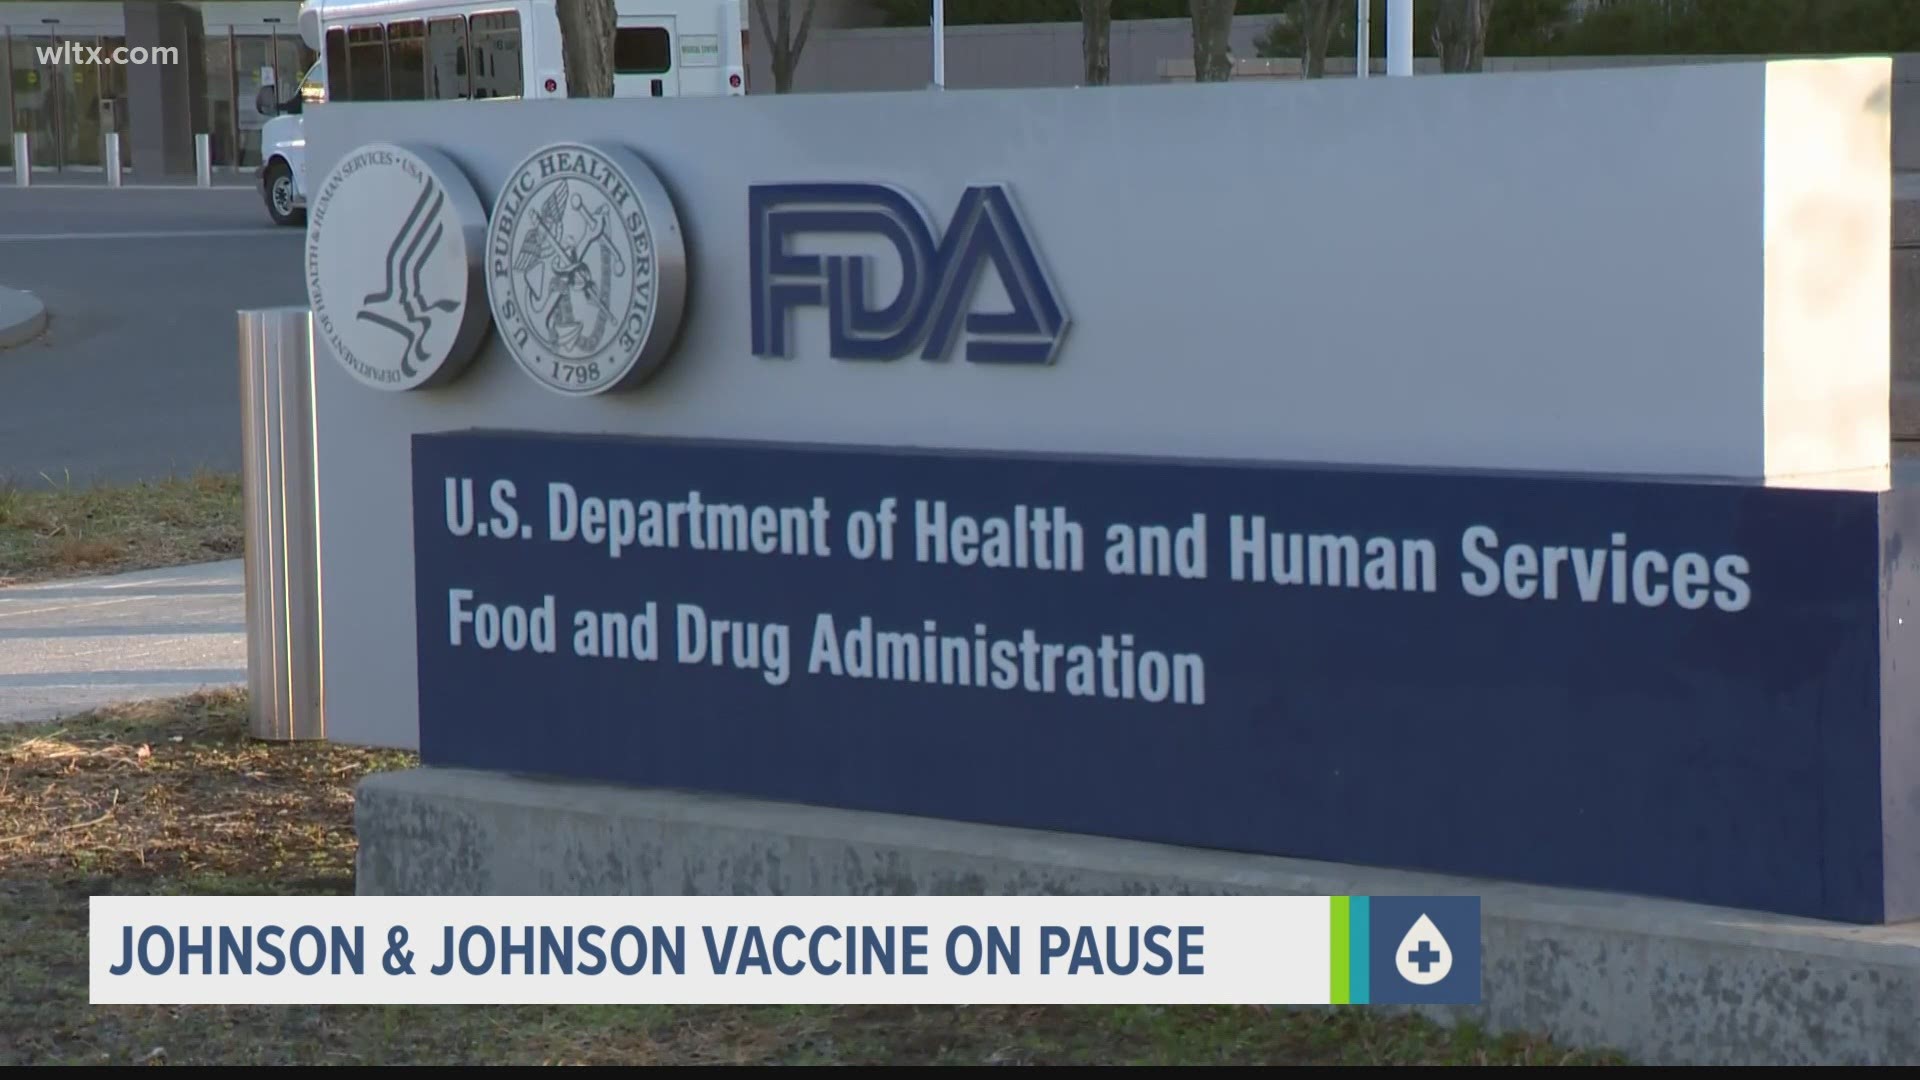 South Carolina is going along with the CDC recommendation to pause the use of the Johnson & Johnson vaccine.